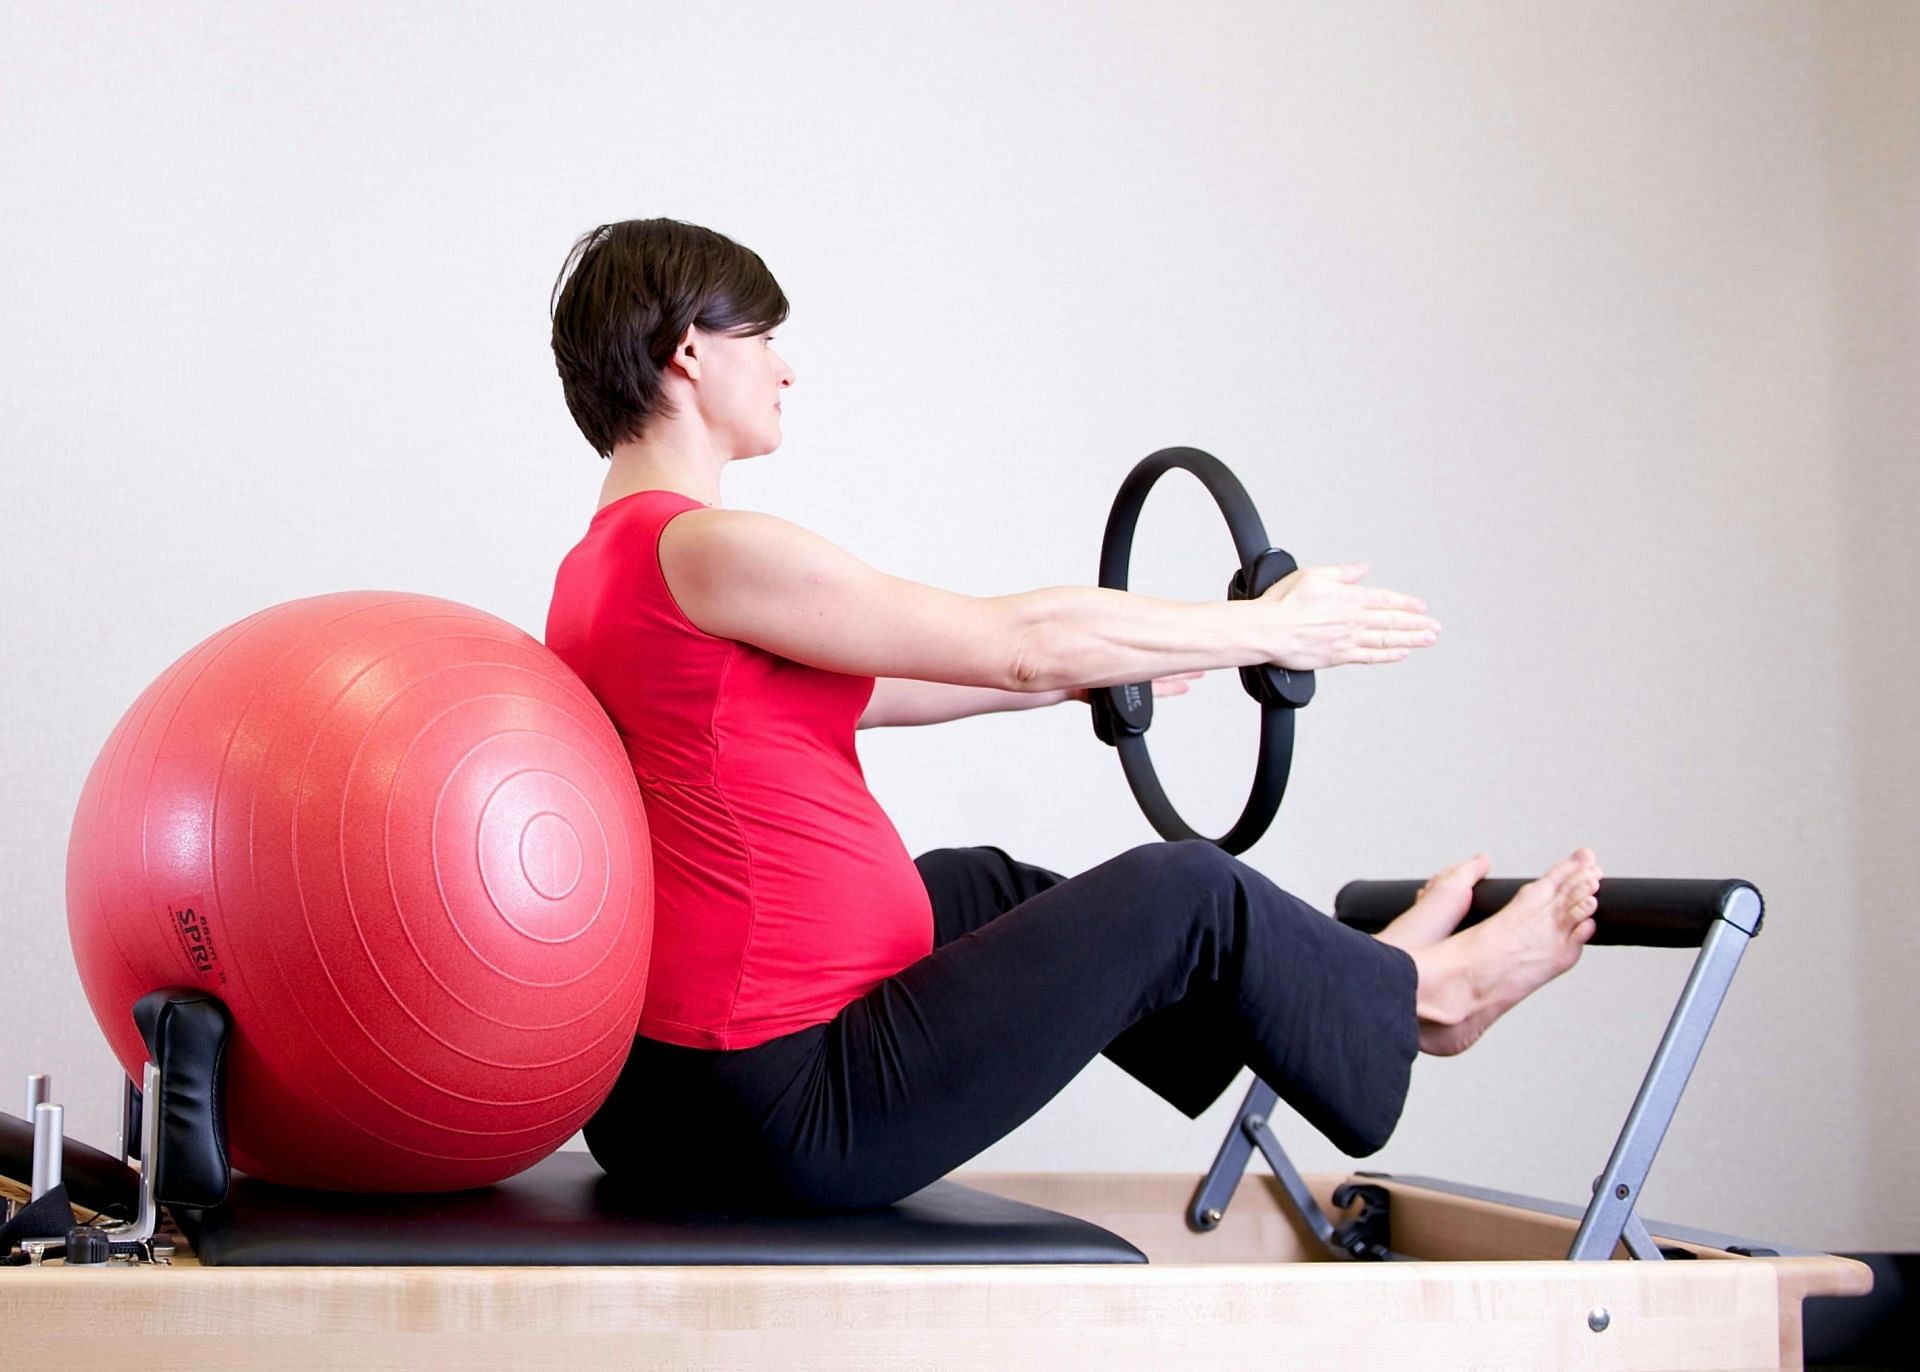 desk exercise equipment (image sourced via Pexels / Photo by jessica)